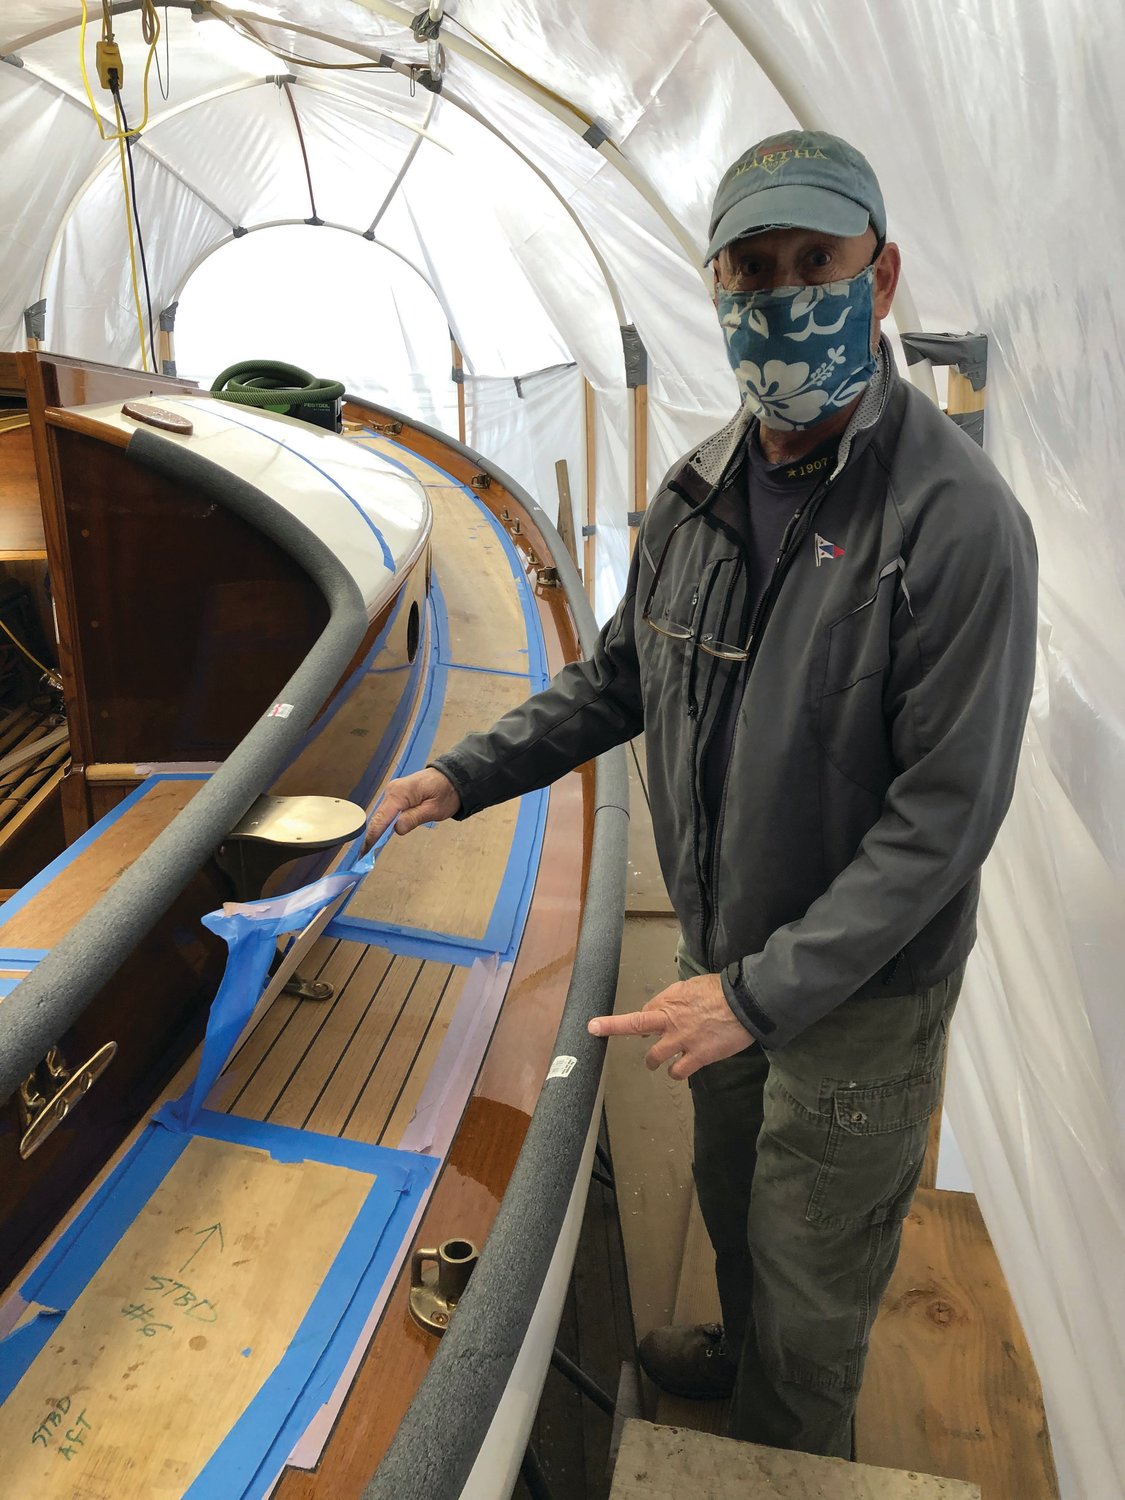 Robert d’Arcy, captain of the schooner Martha, overseeing a project for Robert d’Arcy Marine Services.